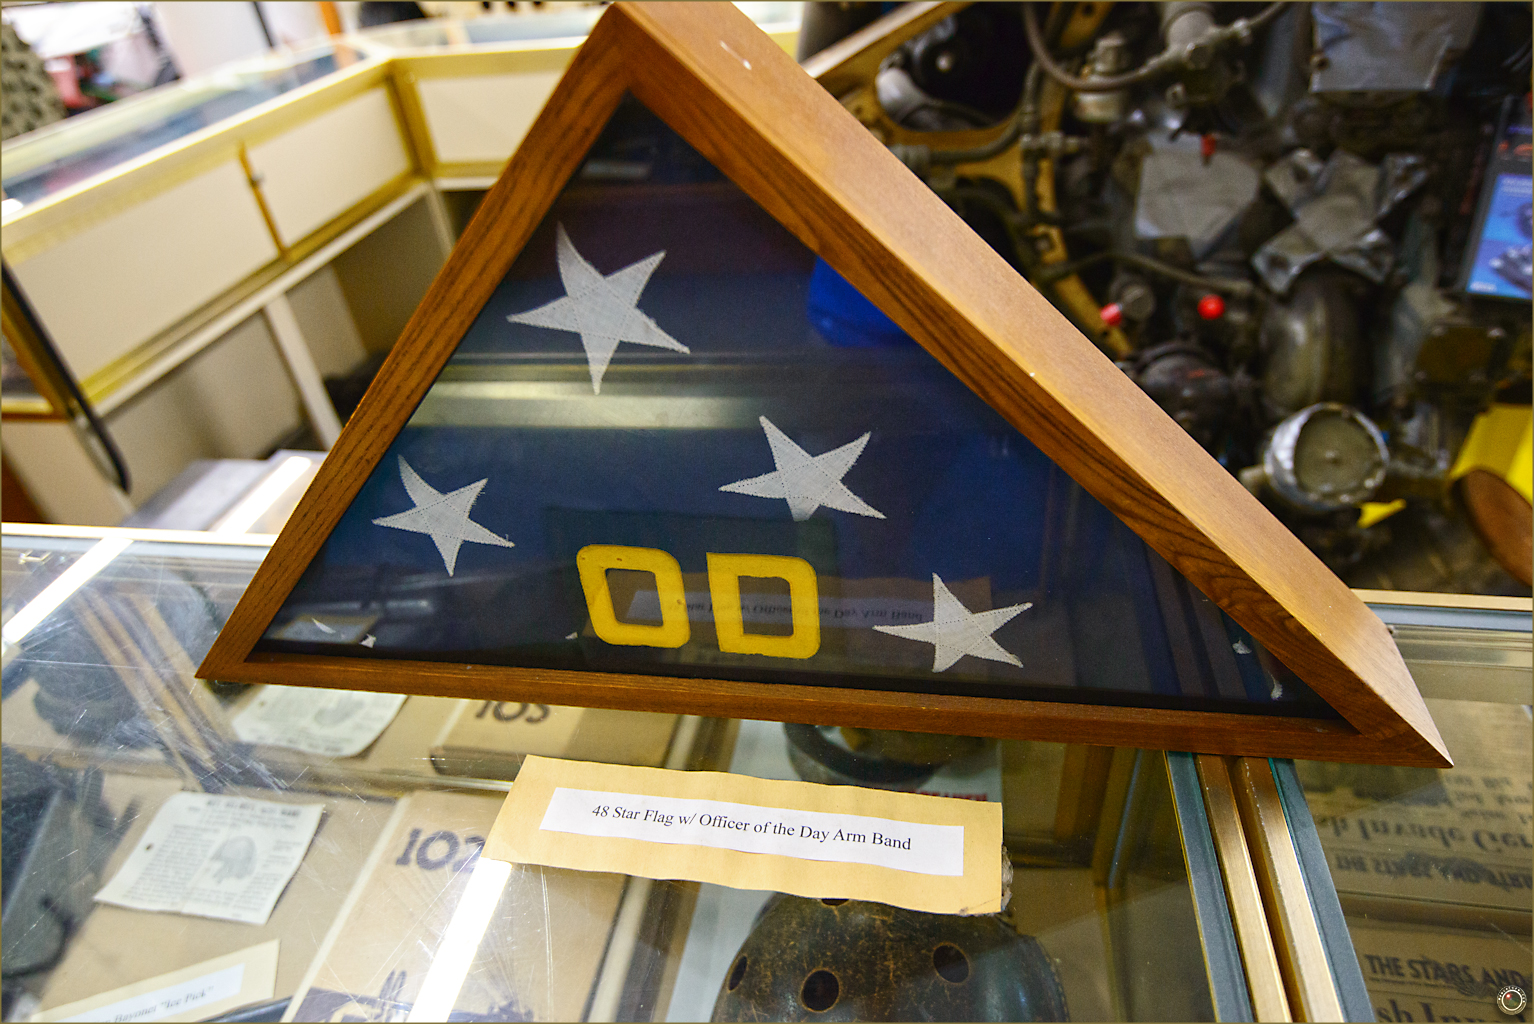 50 Russell Military Museum 48 Star Flag